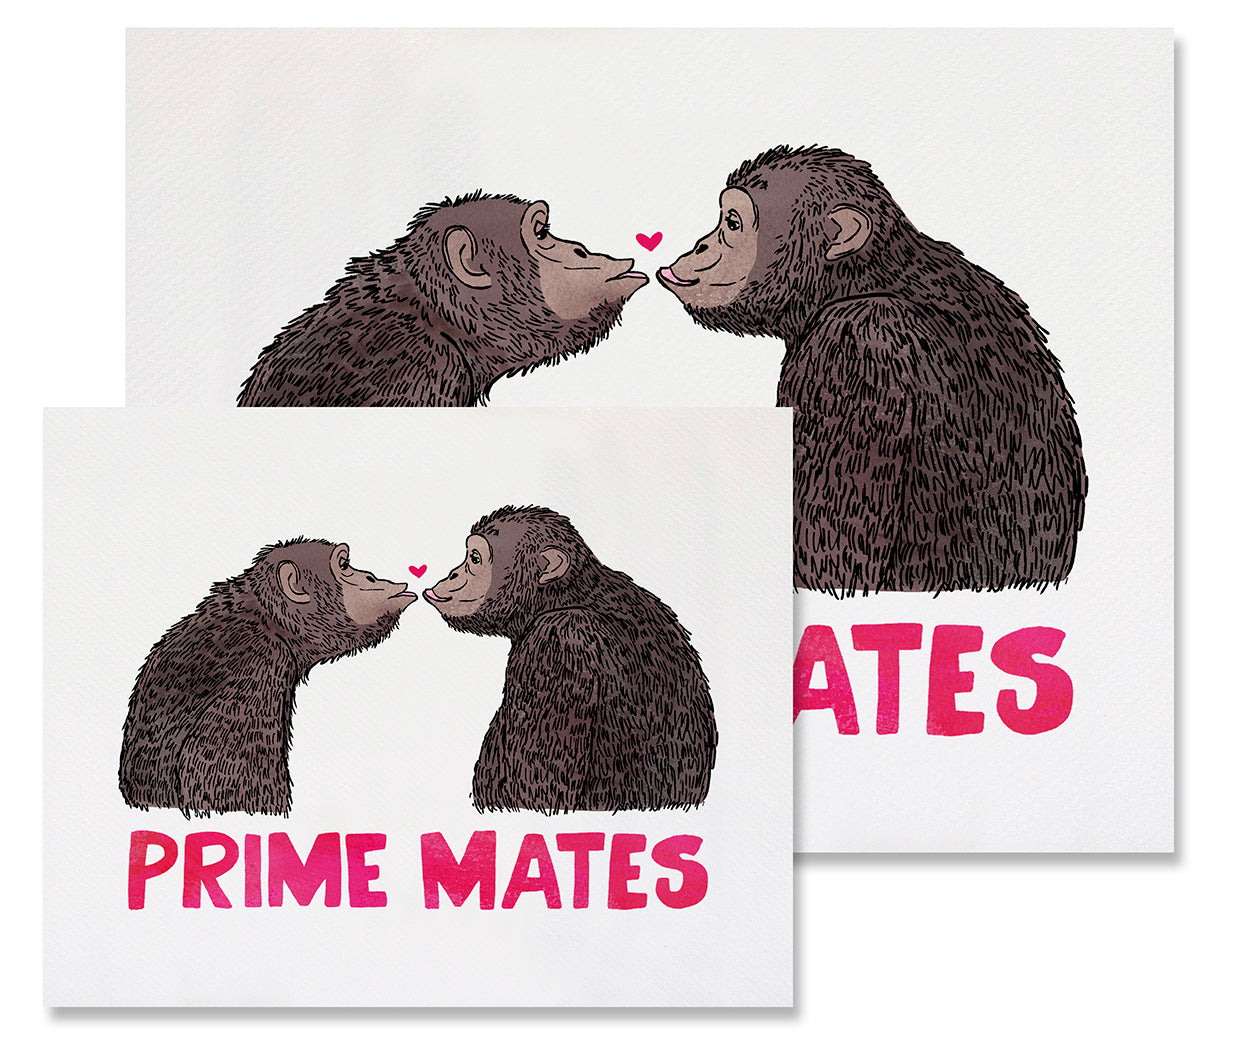 This image shows the two different sizes available for the Prime Mates print - 8x10in and 11x14in. The print features two chimpanzees, in profile, facing and gazing at each other. They are posed to kiss and there is a tiny dark pink heart between them right above their about-to-touch lips. Underneath them, spanning the width of the card, in deep pink, are the words "Prime Mates". The artwork is printed on a lightly textured, 100% cotton rag paper, which feels like smooth watercolor paper.